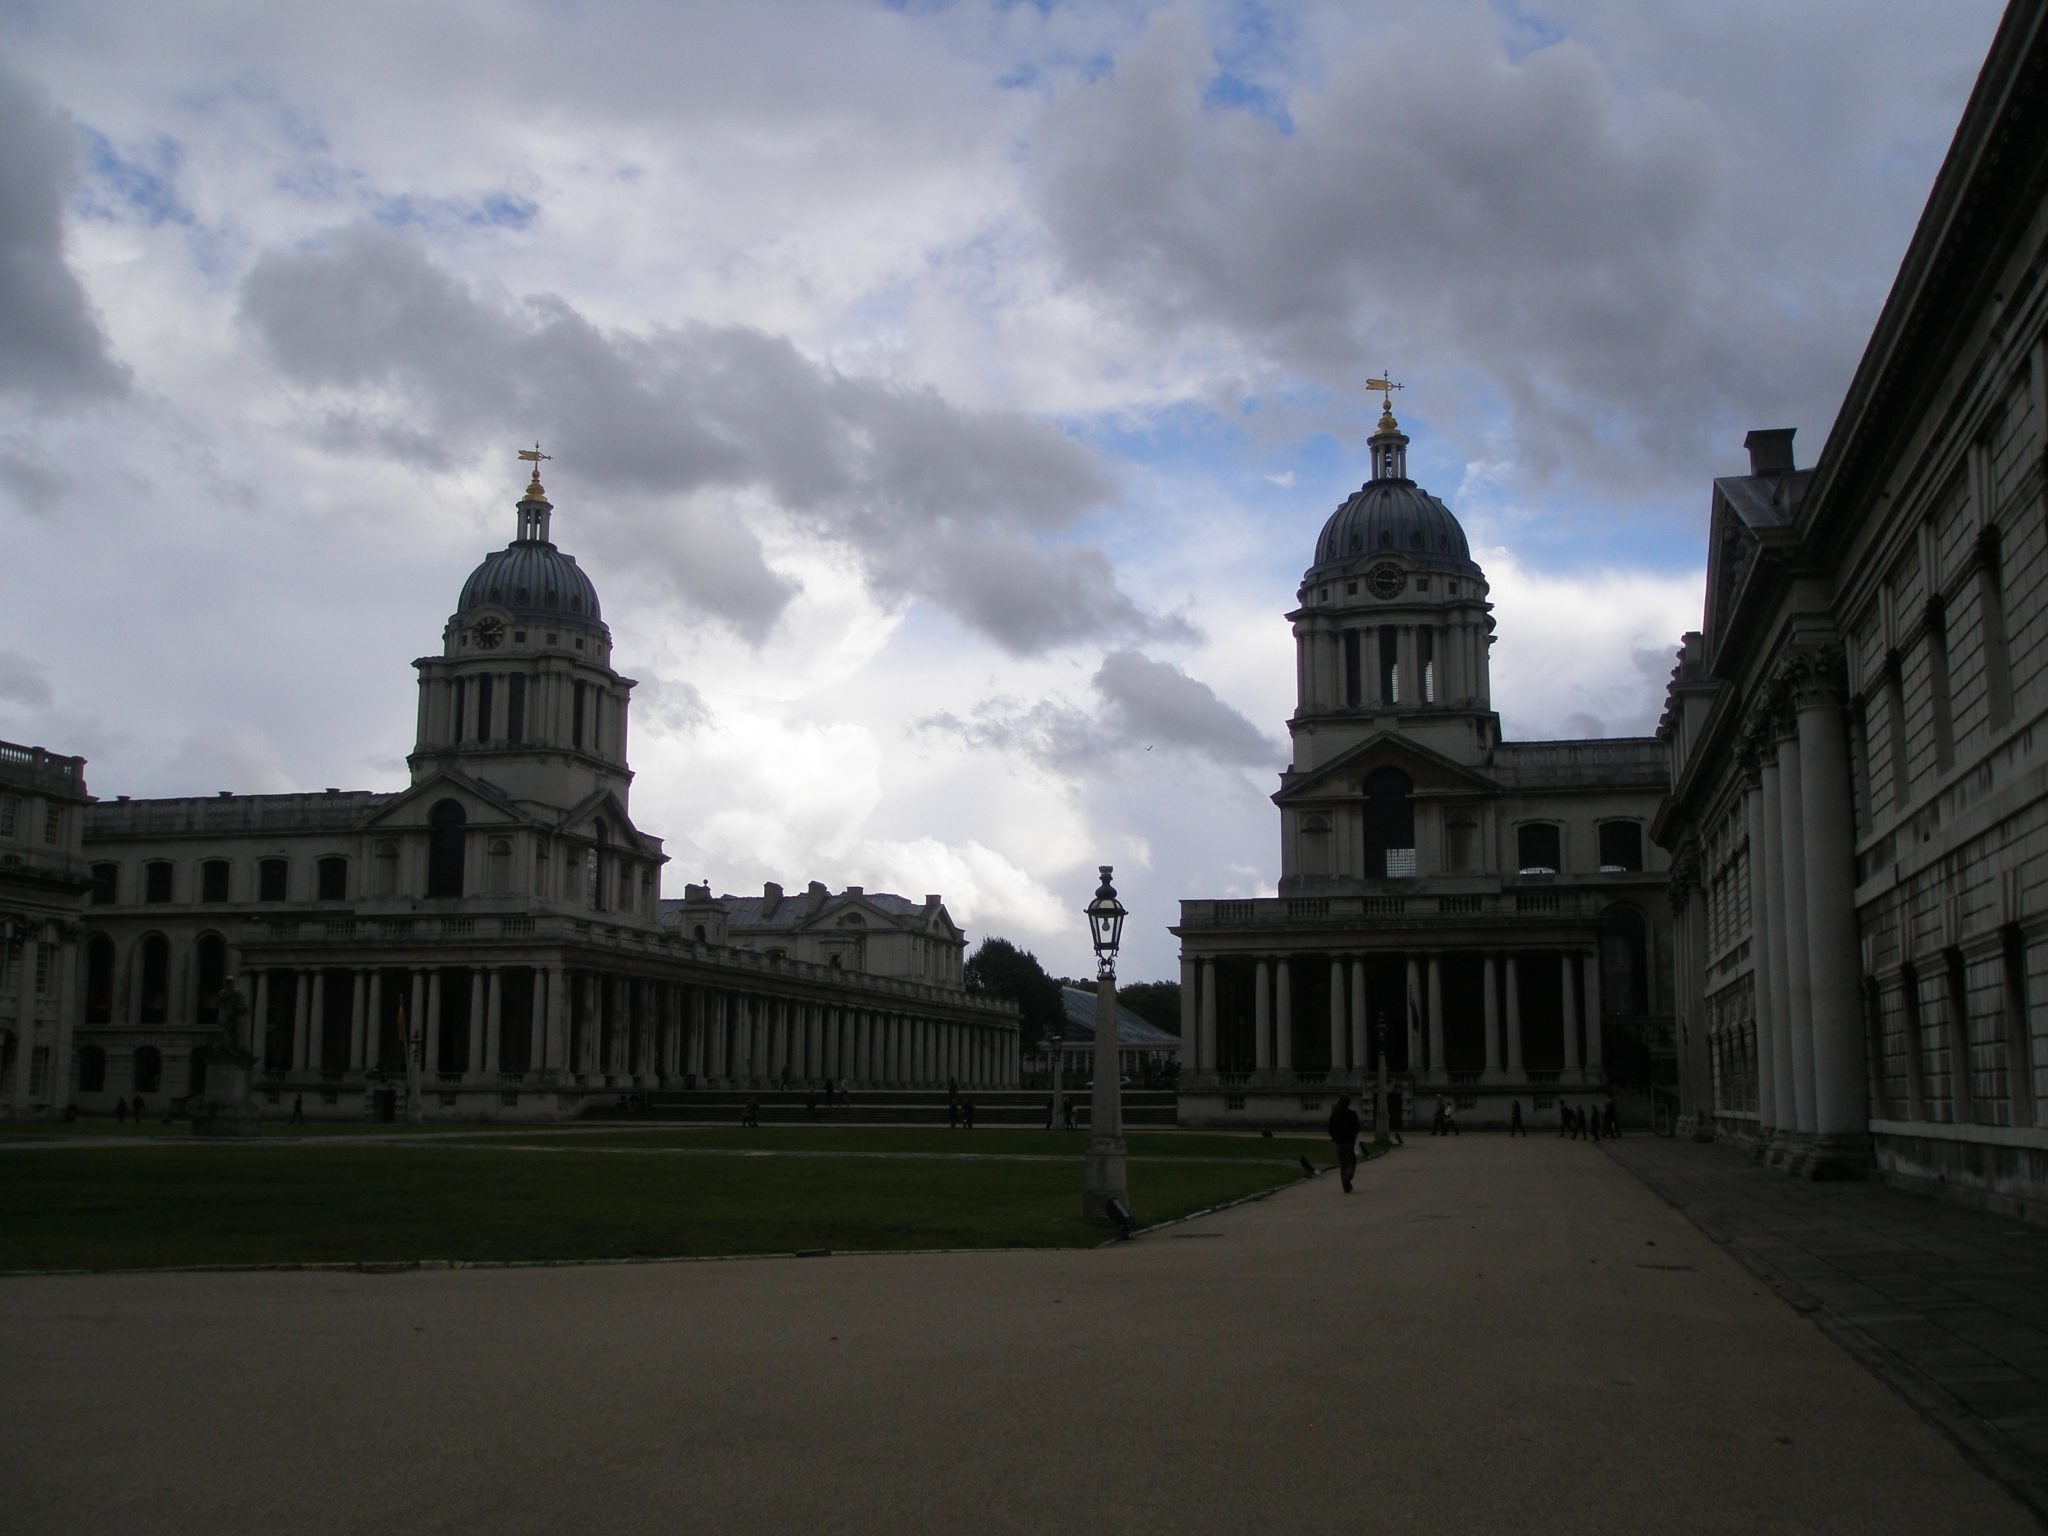 Old Royal Naval College. On the left: Queen Mary Court & Chapel. On the right: King William Court & The Painted Hall, which sits below the great dome.